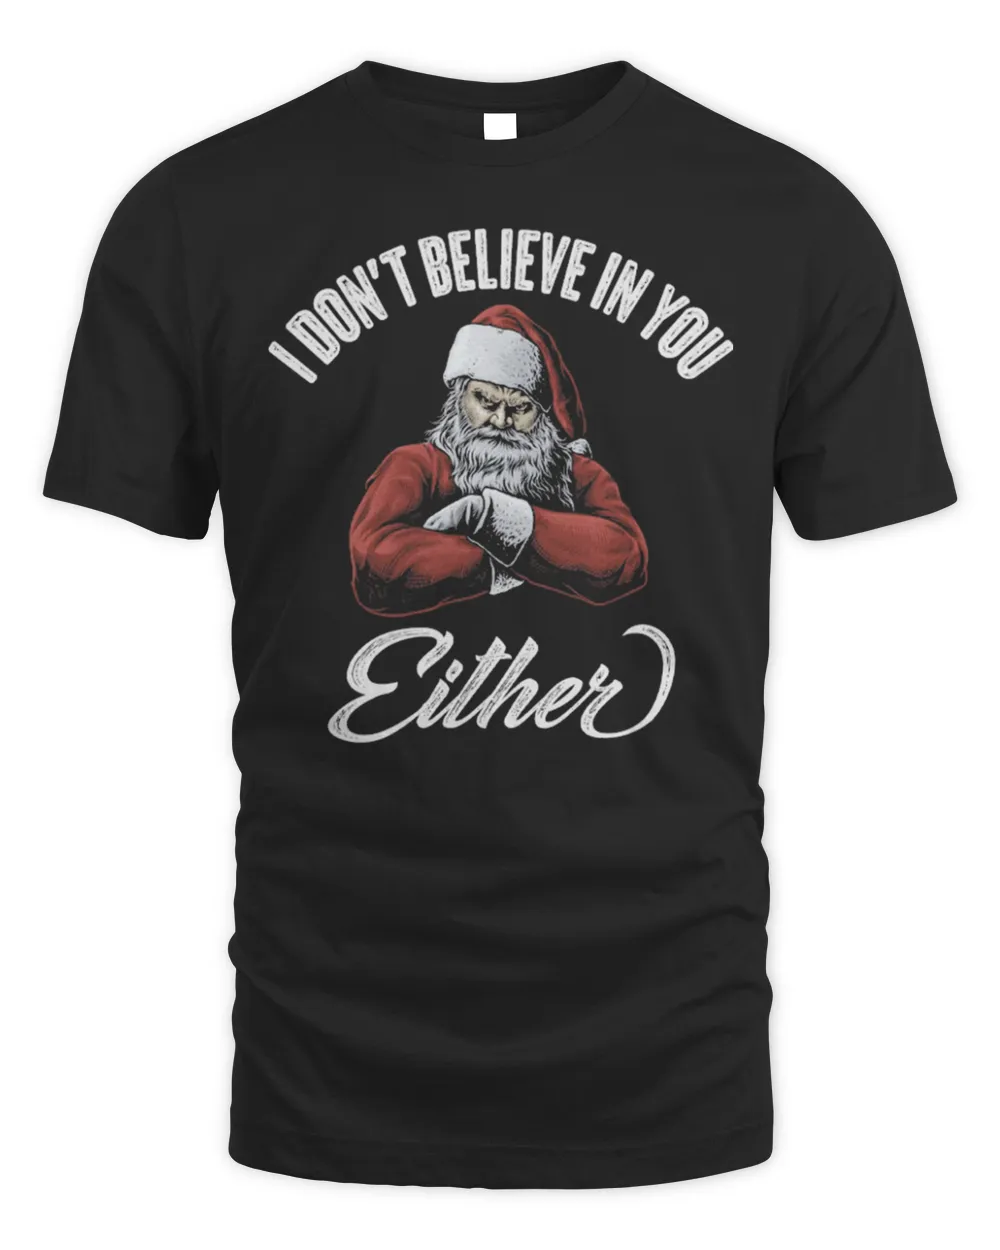 I don’t believe in you either shirt